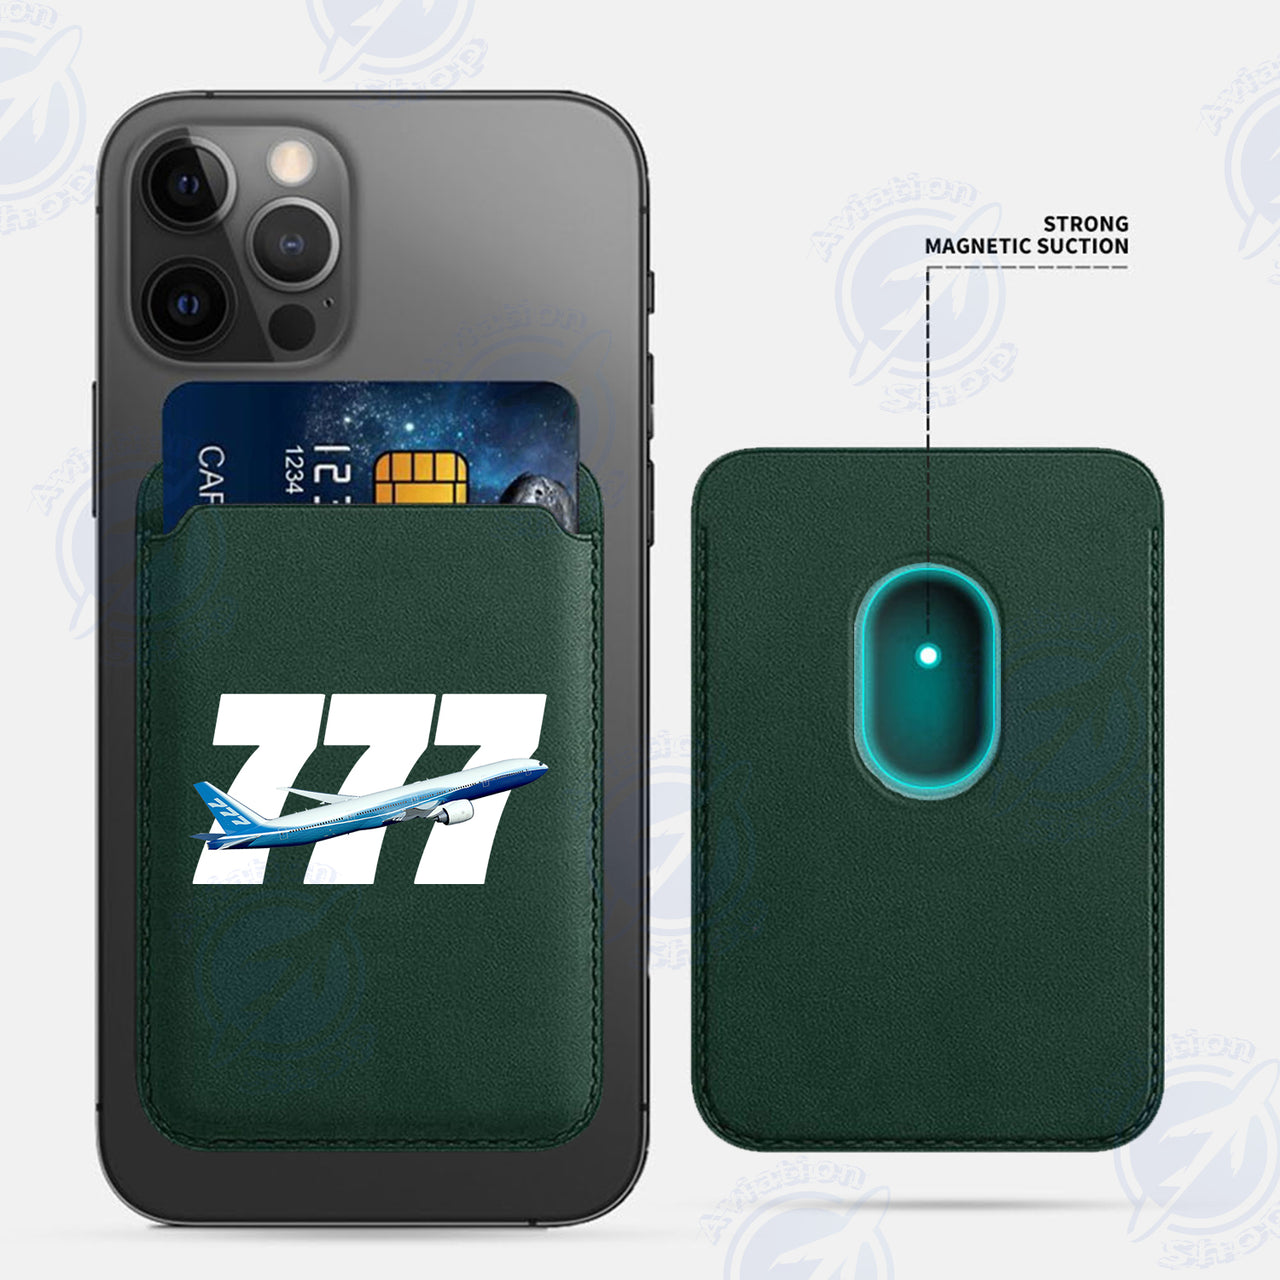 Super Boeing 777 iPhone Cases Magnetic Card Wallet